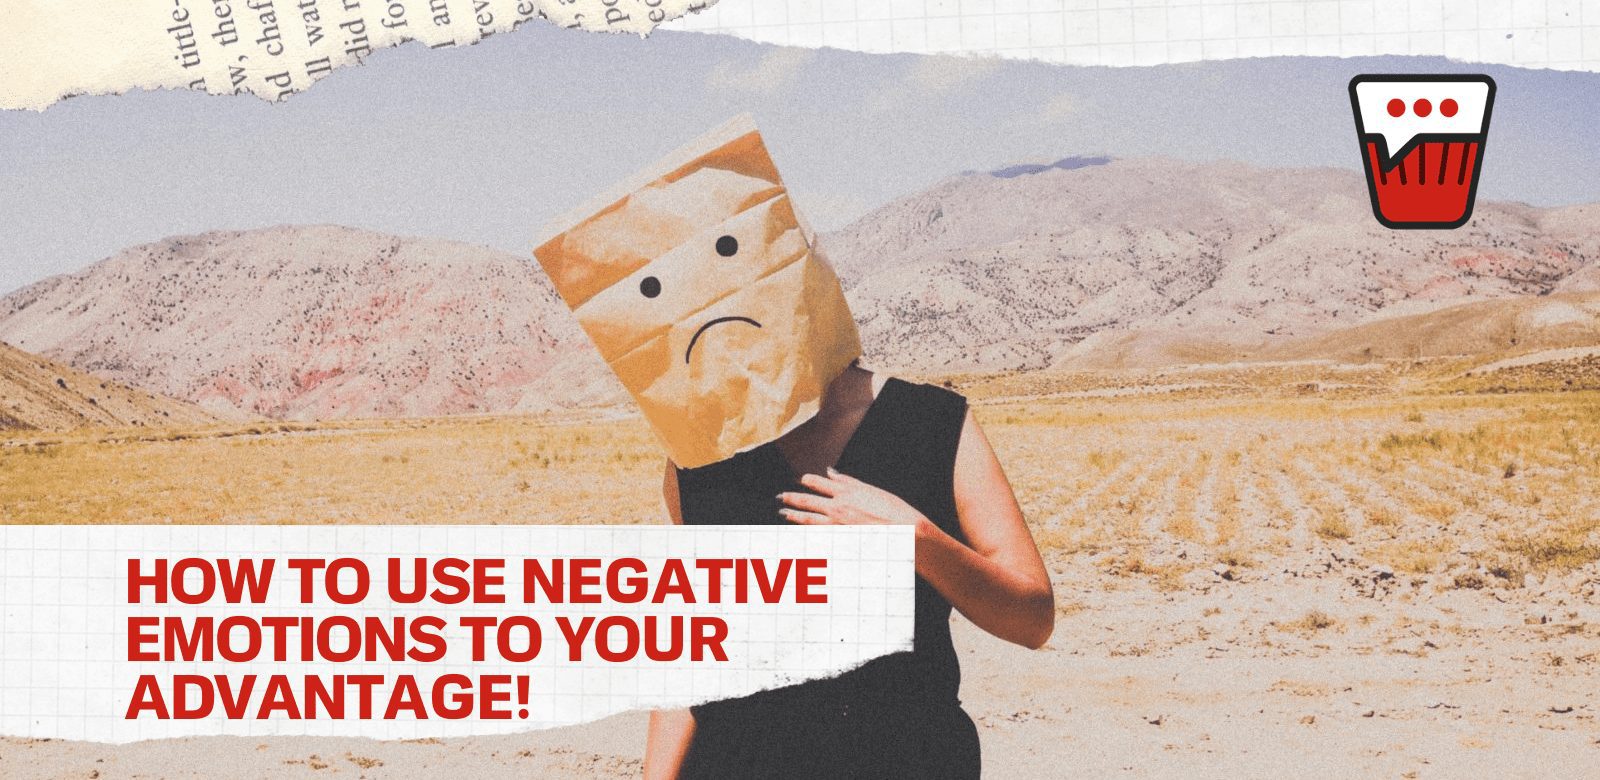 How To Use Negative Emotions To Your Advantage!